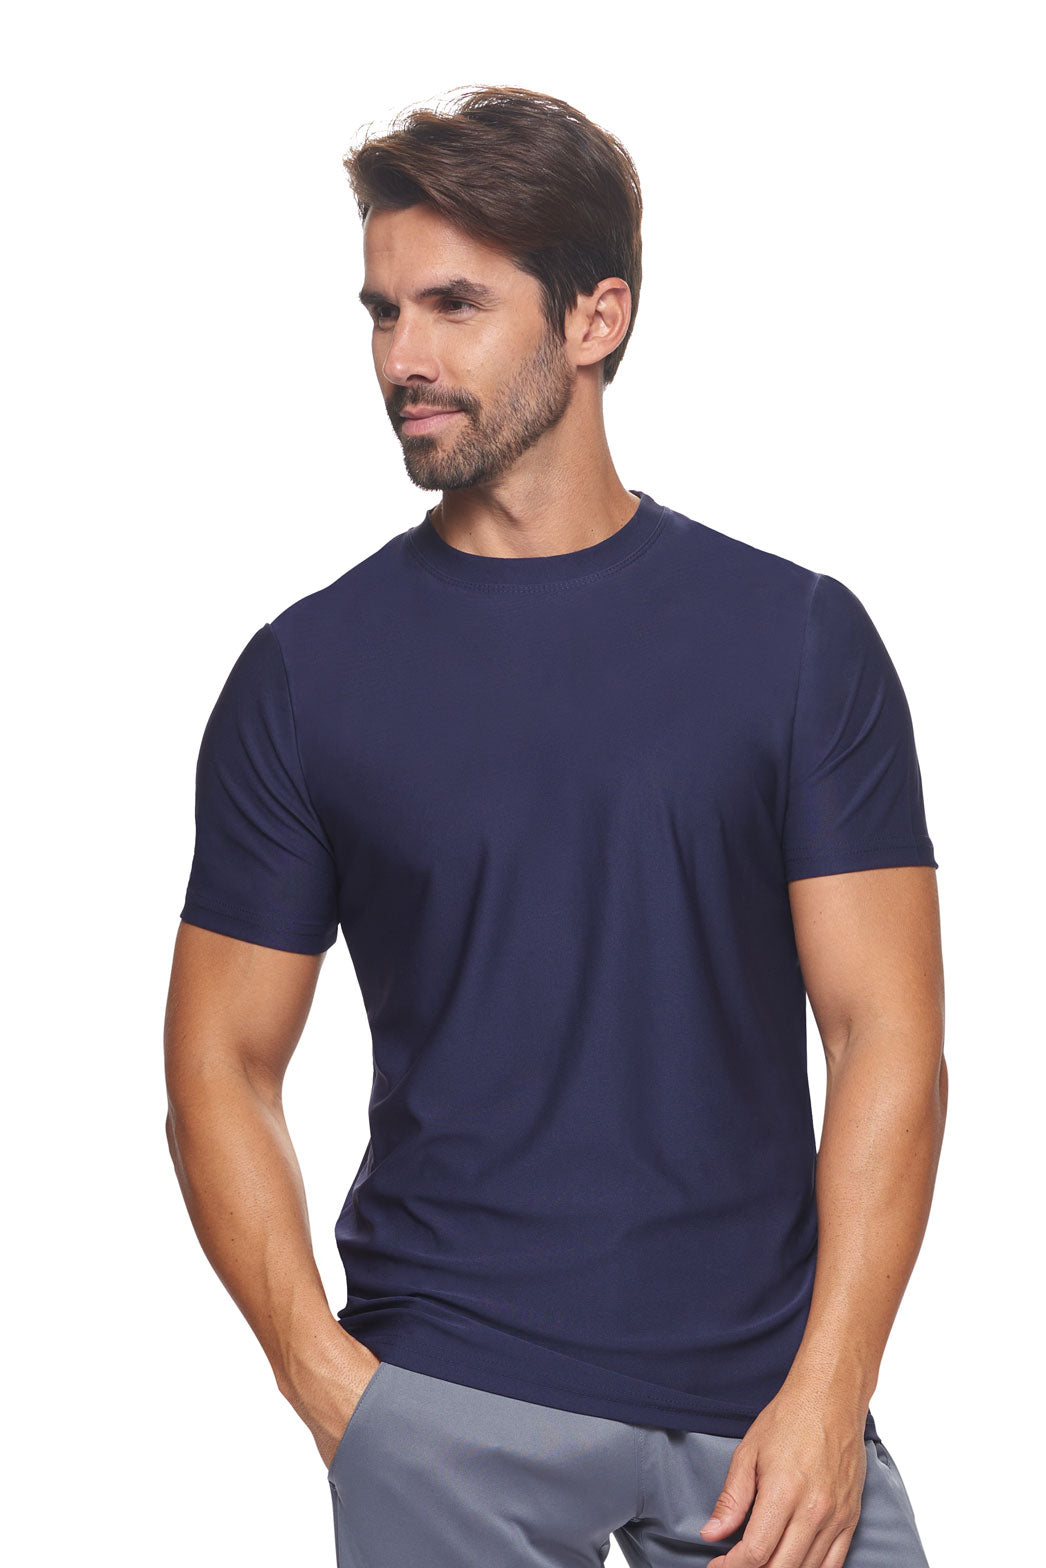 Expert Brand Wholesale Made in USA Recycled Polyester Repreve Performance Tee Unisex Twilight#twilight